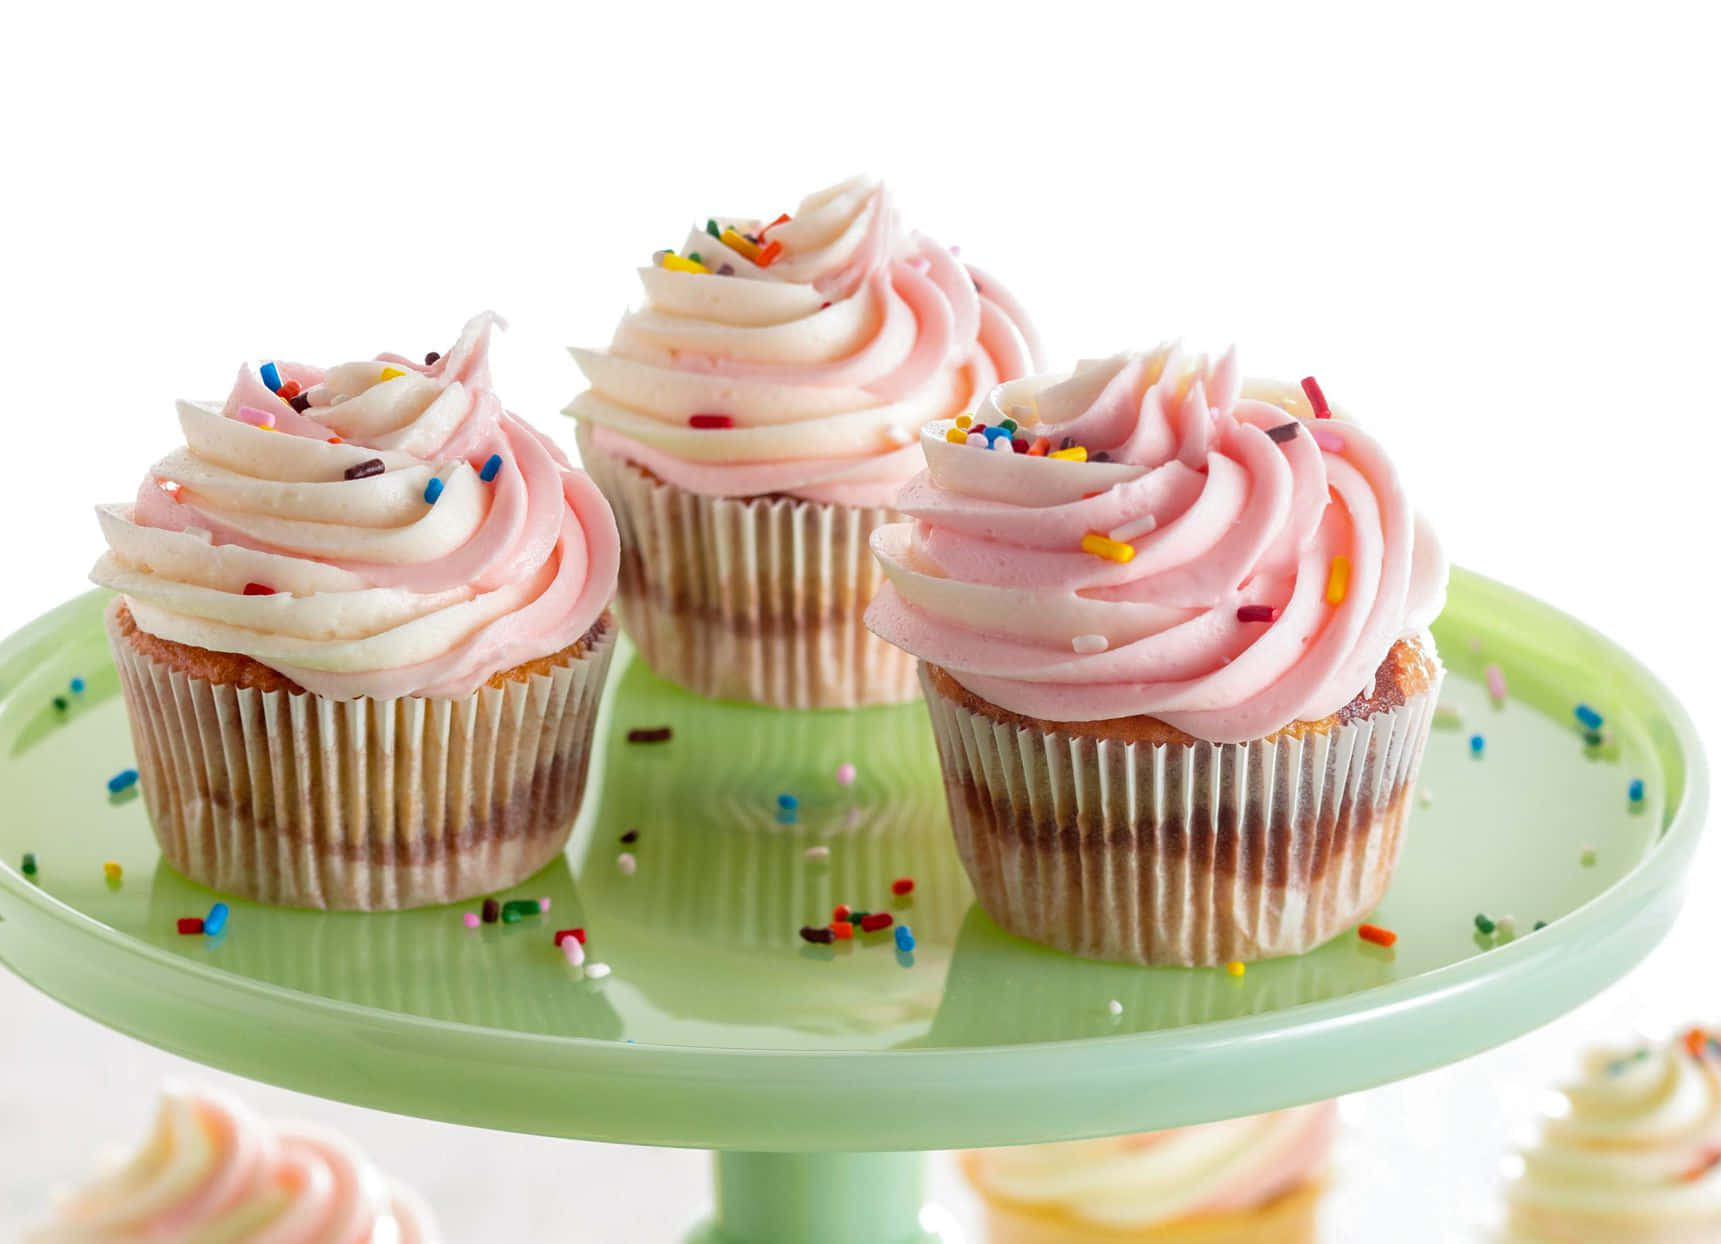 Delicious and delightful cupcake ready to be enjoyed.